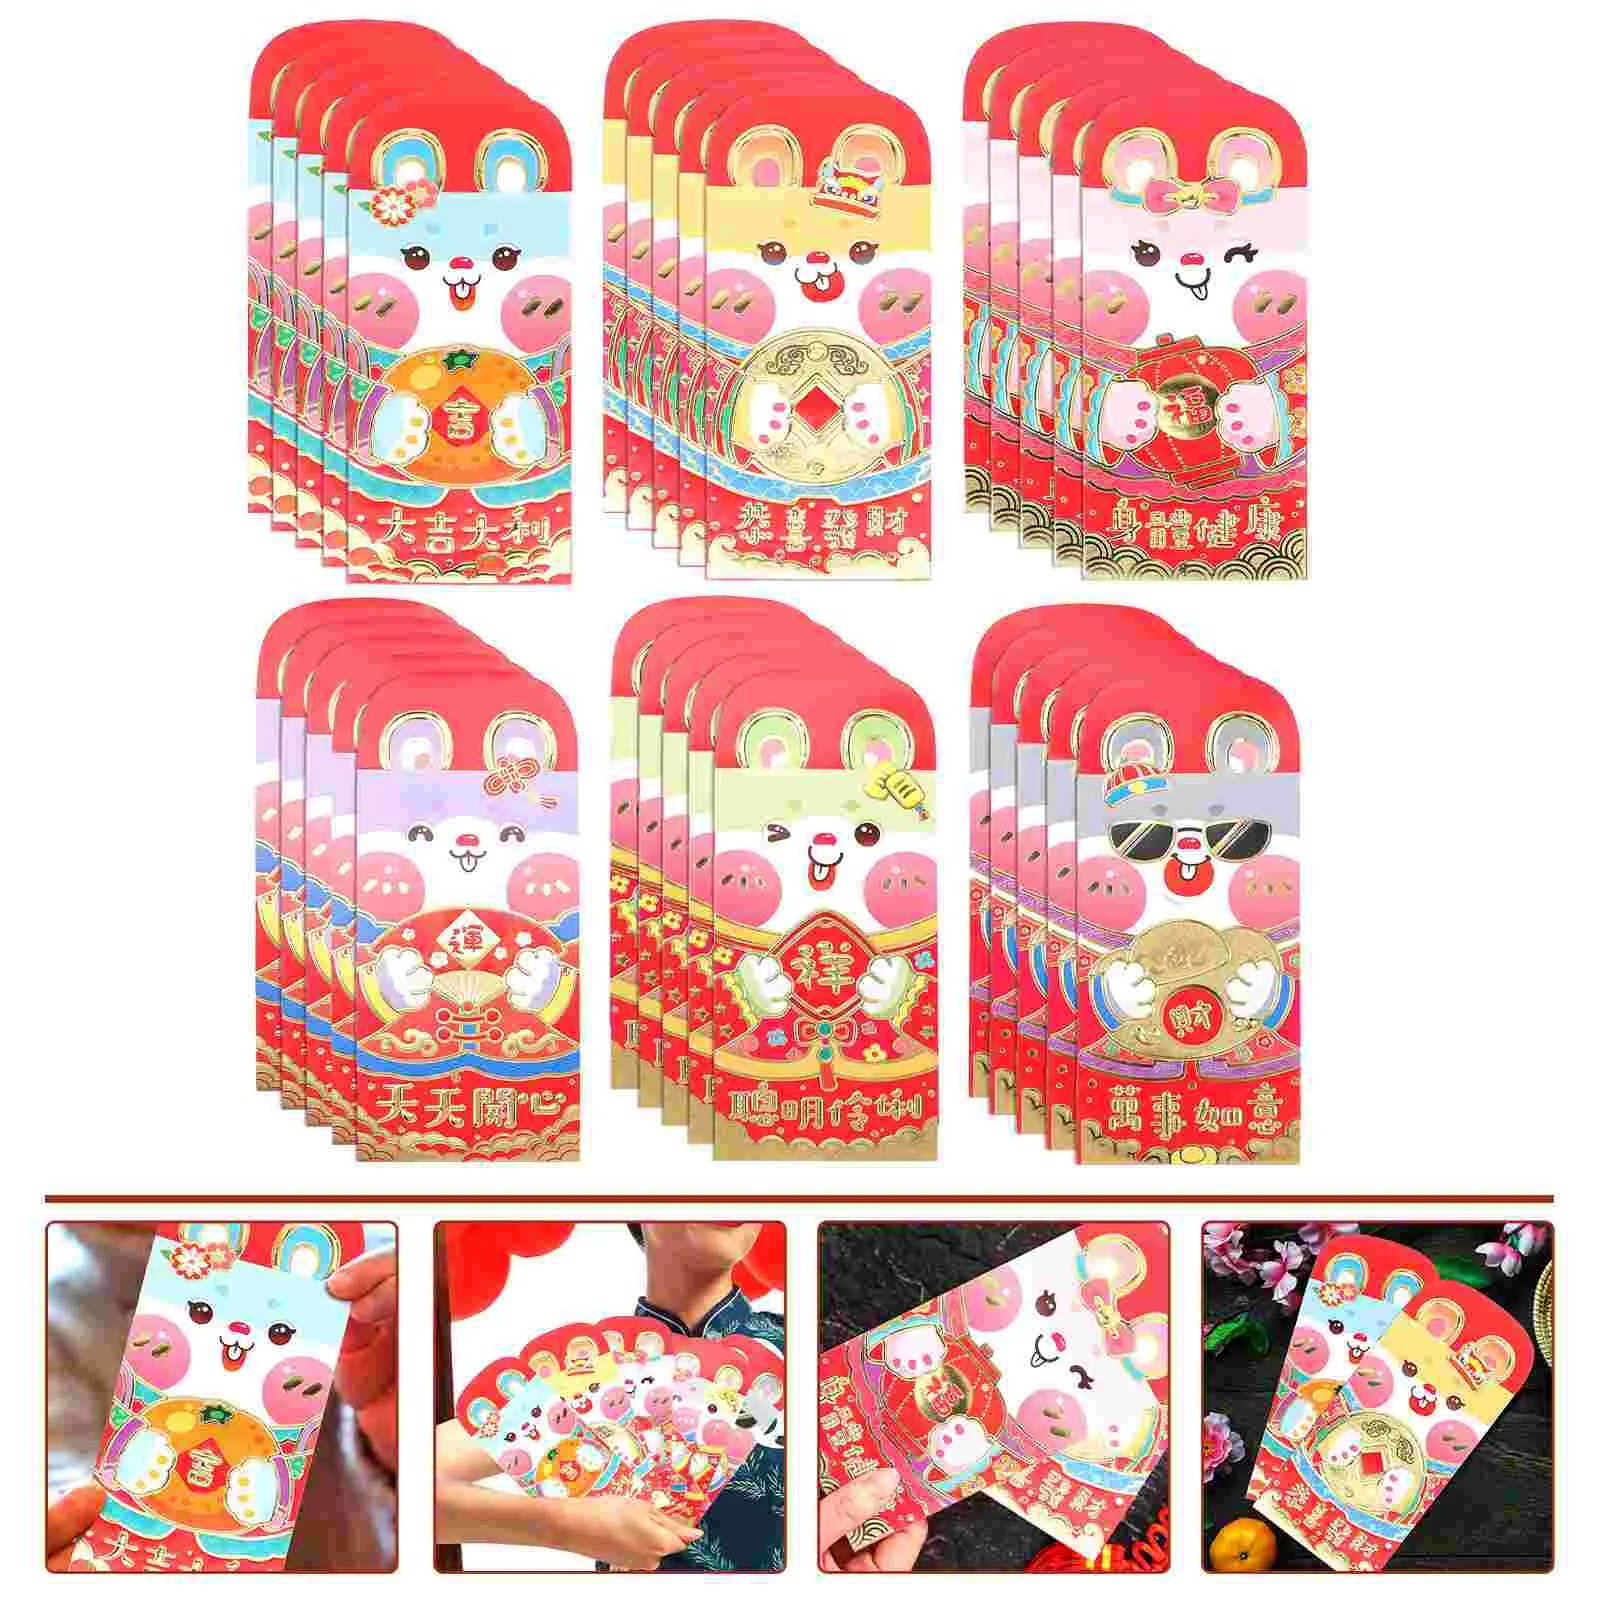 

Red Year New Envelopes Chinese Envelope Money Packet Packets Rabbit Lucky Bag Gift Eve Years Spring Pocket Wedding Festival Bao